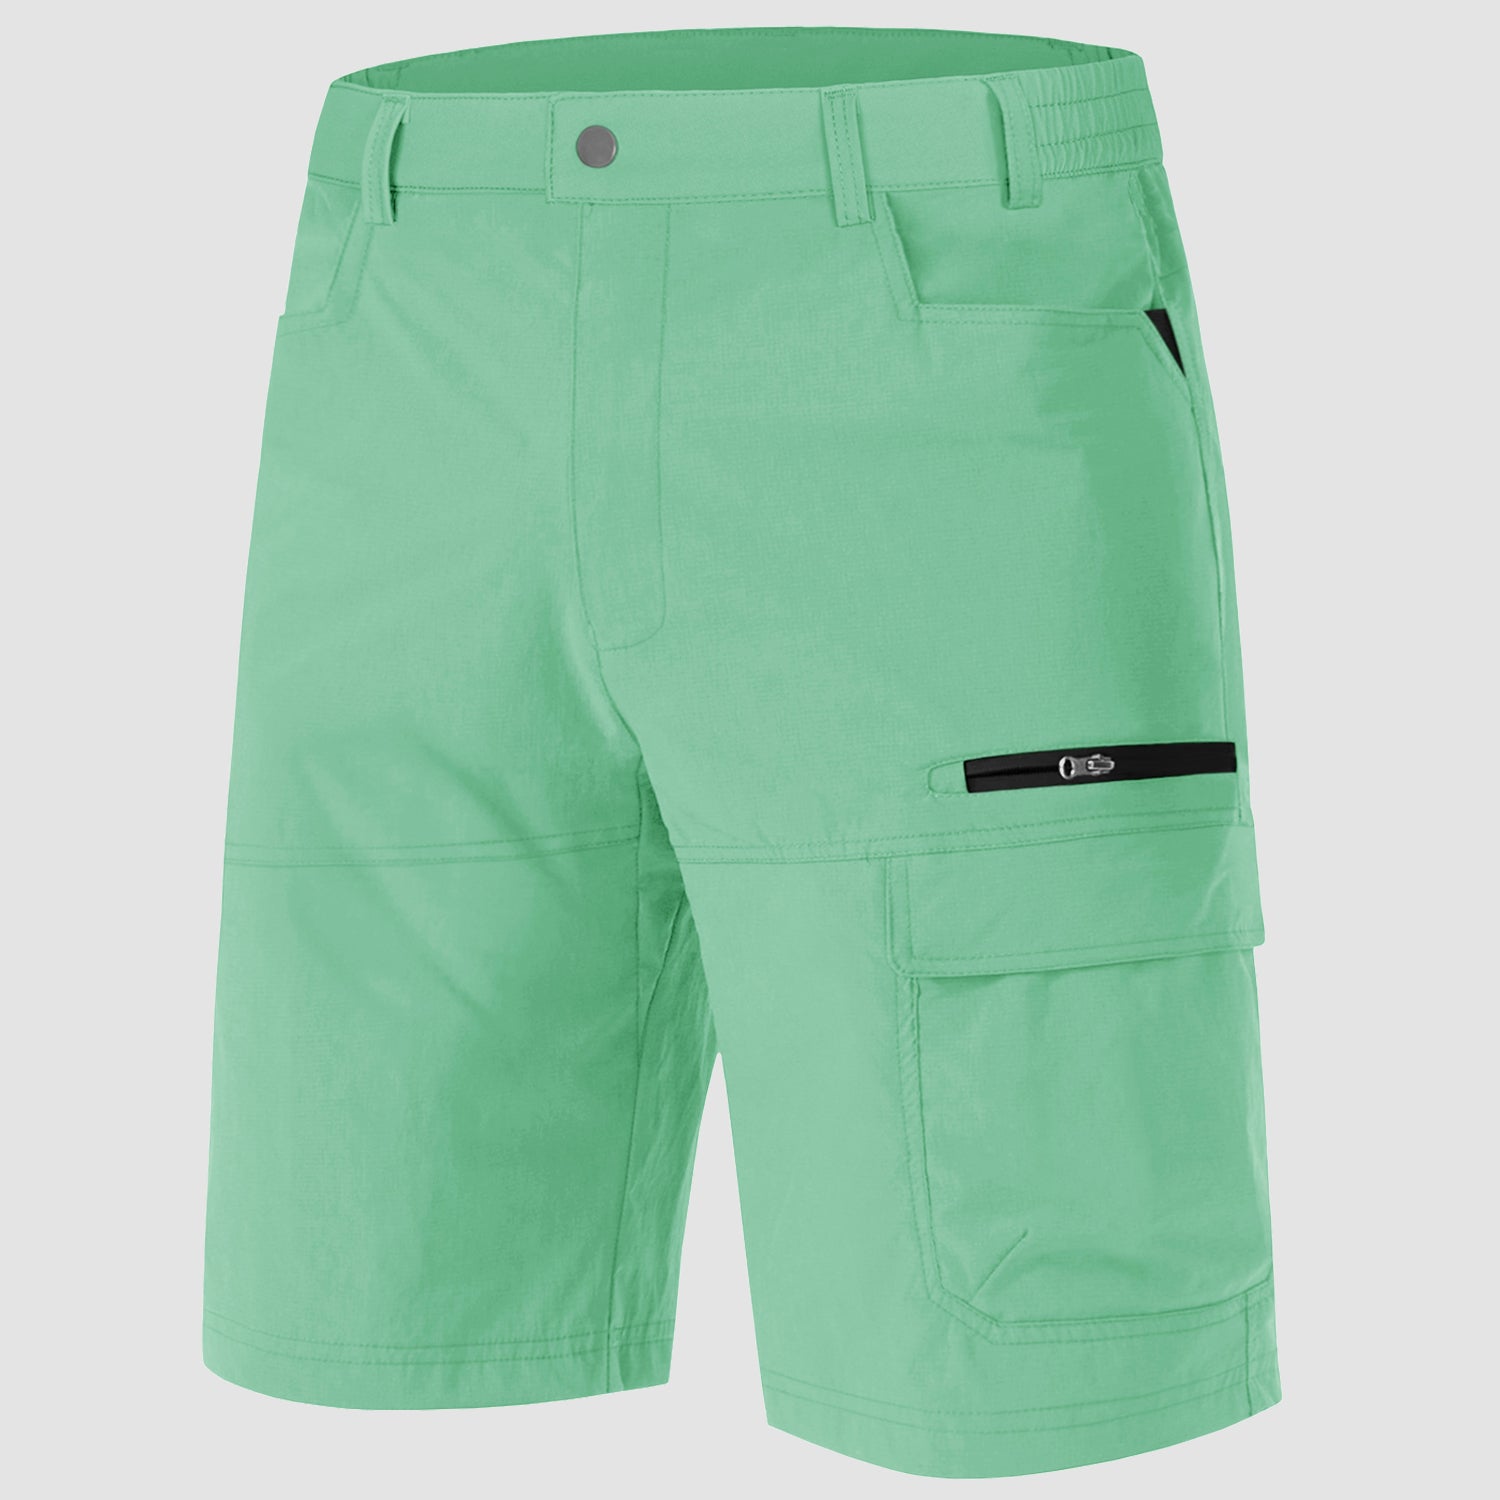 【Buy 4 Get 4th Free】Men's Quick Dry Cargo Shorts, Mint / 30